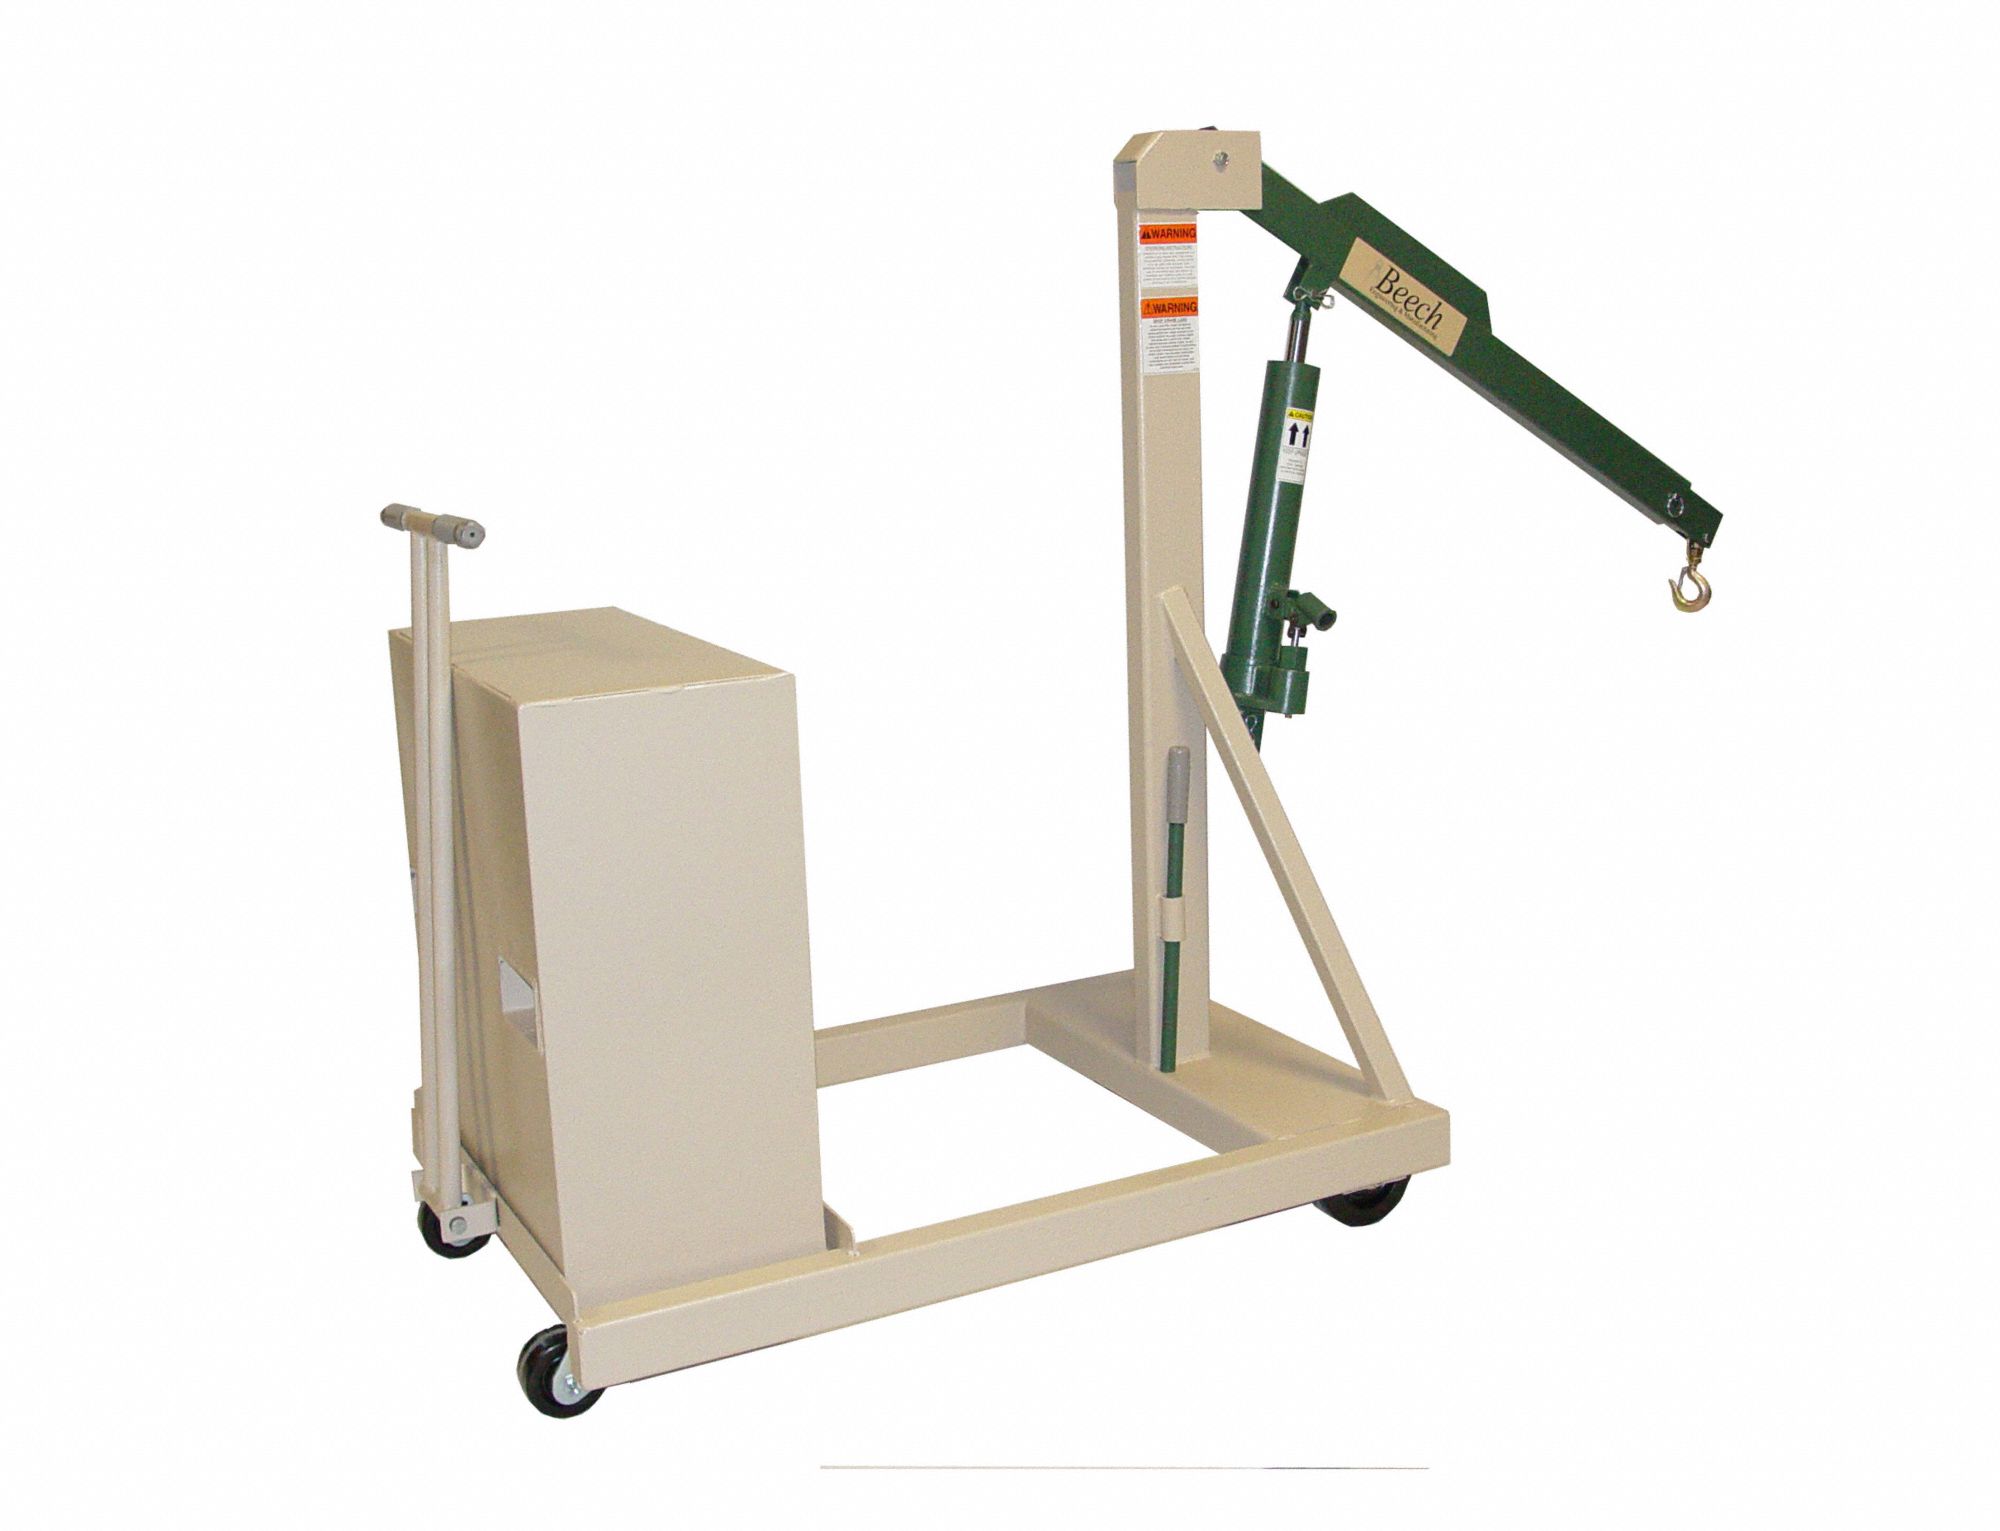 Counterbalance Mobile Floor Crane: 57 1/4 in Ht (In.), 49 9/16 in Lg (In.), 30 1/2 in Wd (In.)